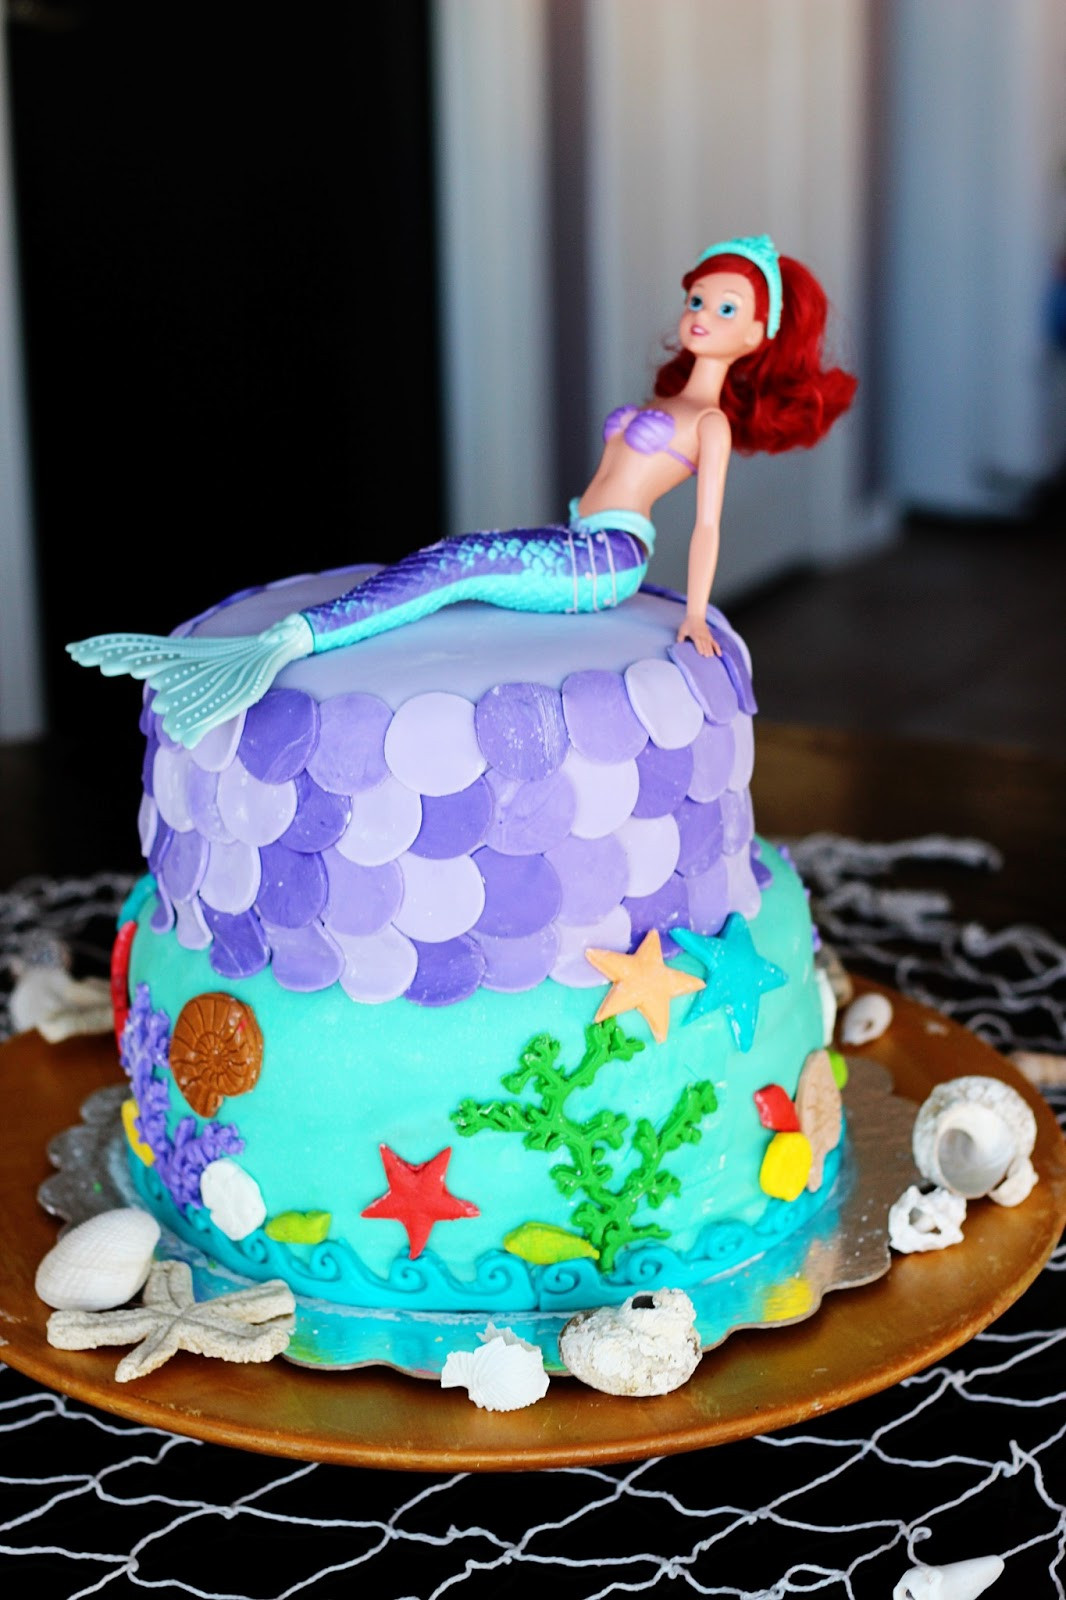 Mermaid Party Ideas 4 Year Old
 Sparklinbecks A Mermaid Party for A 3 Year old